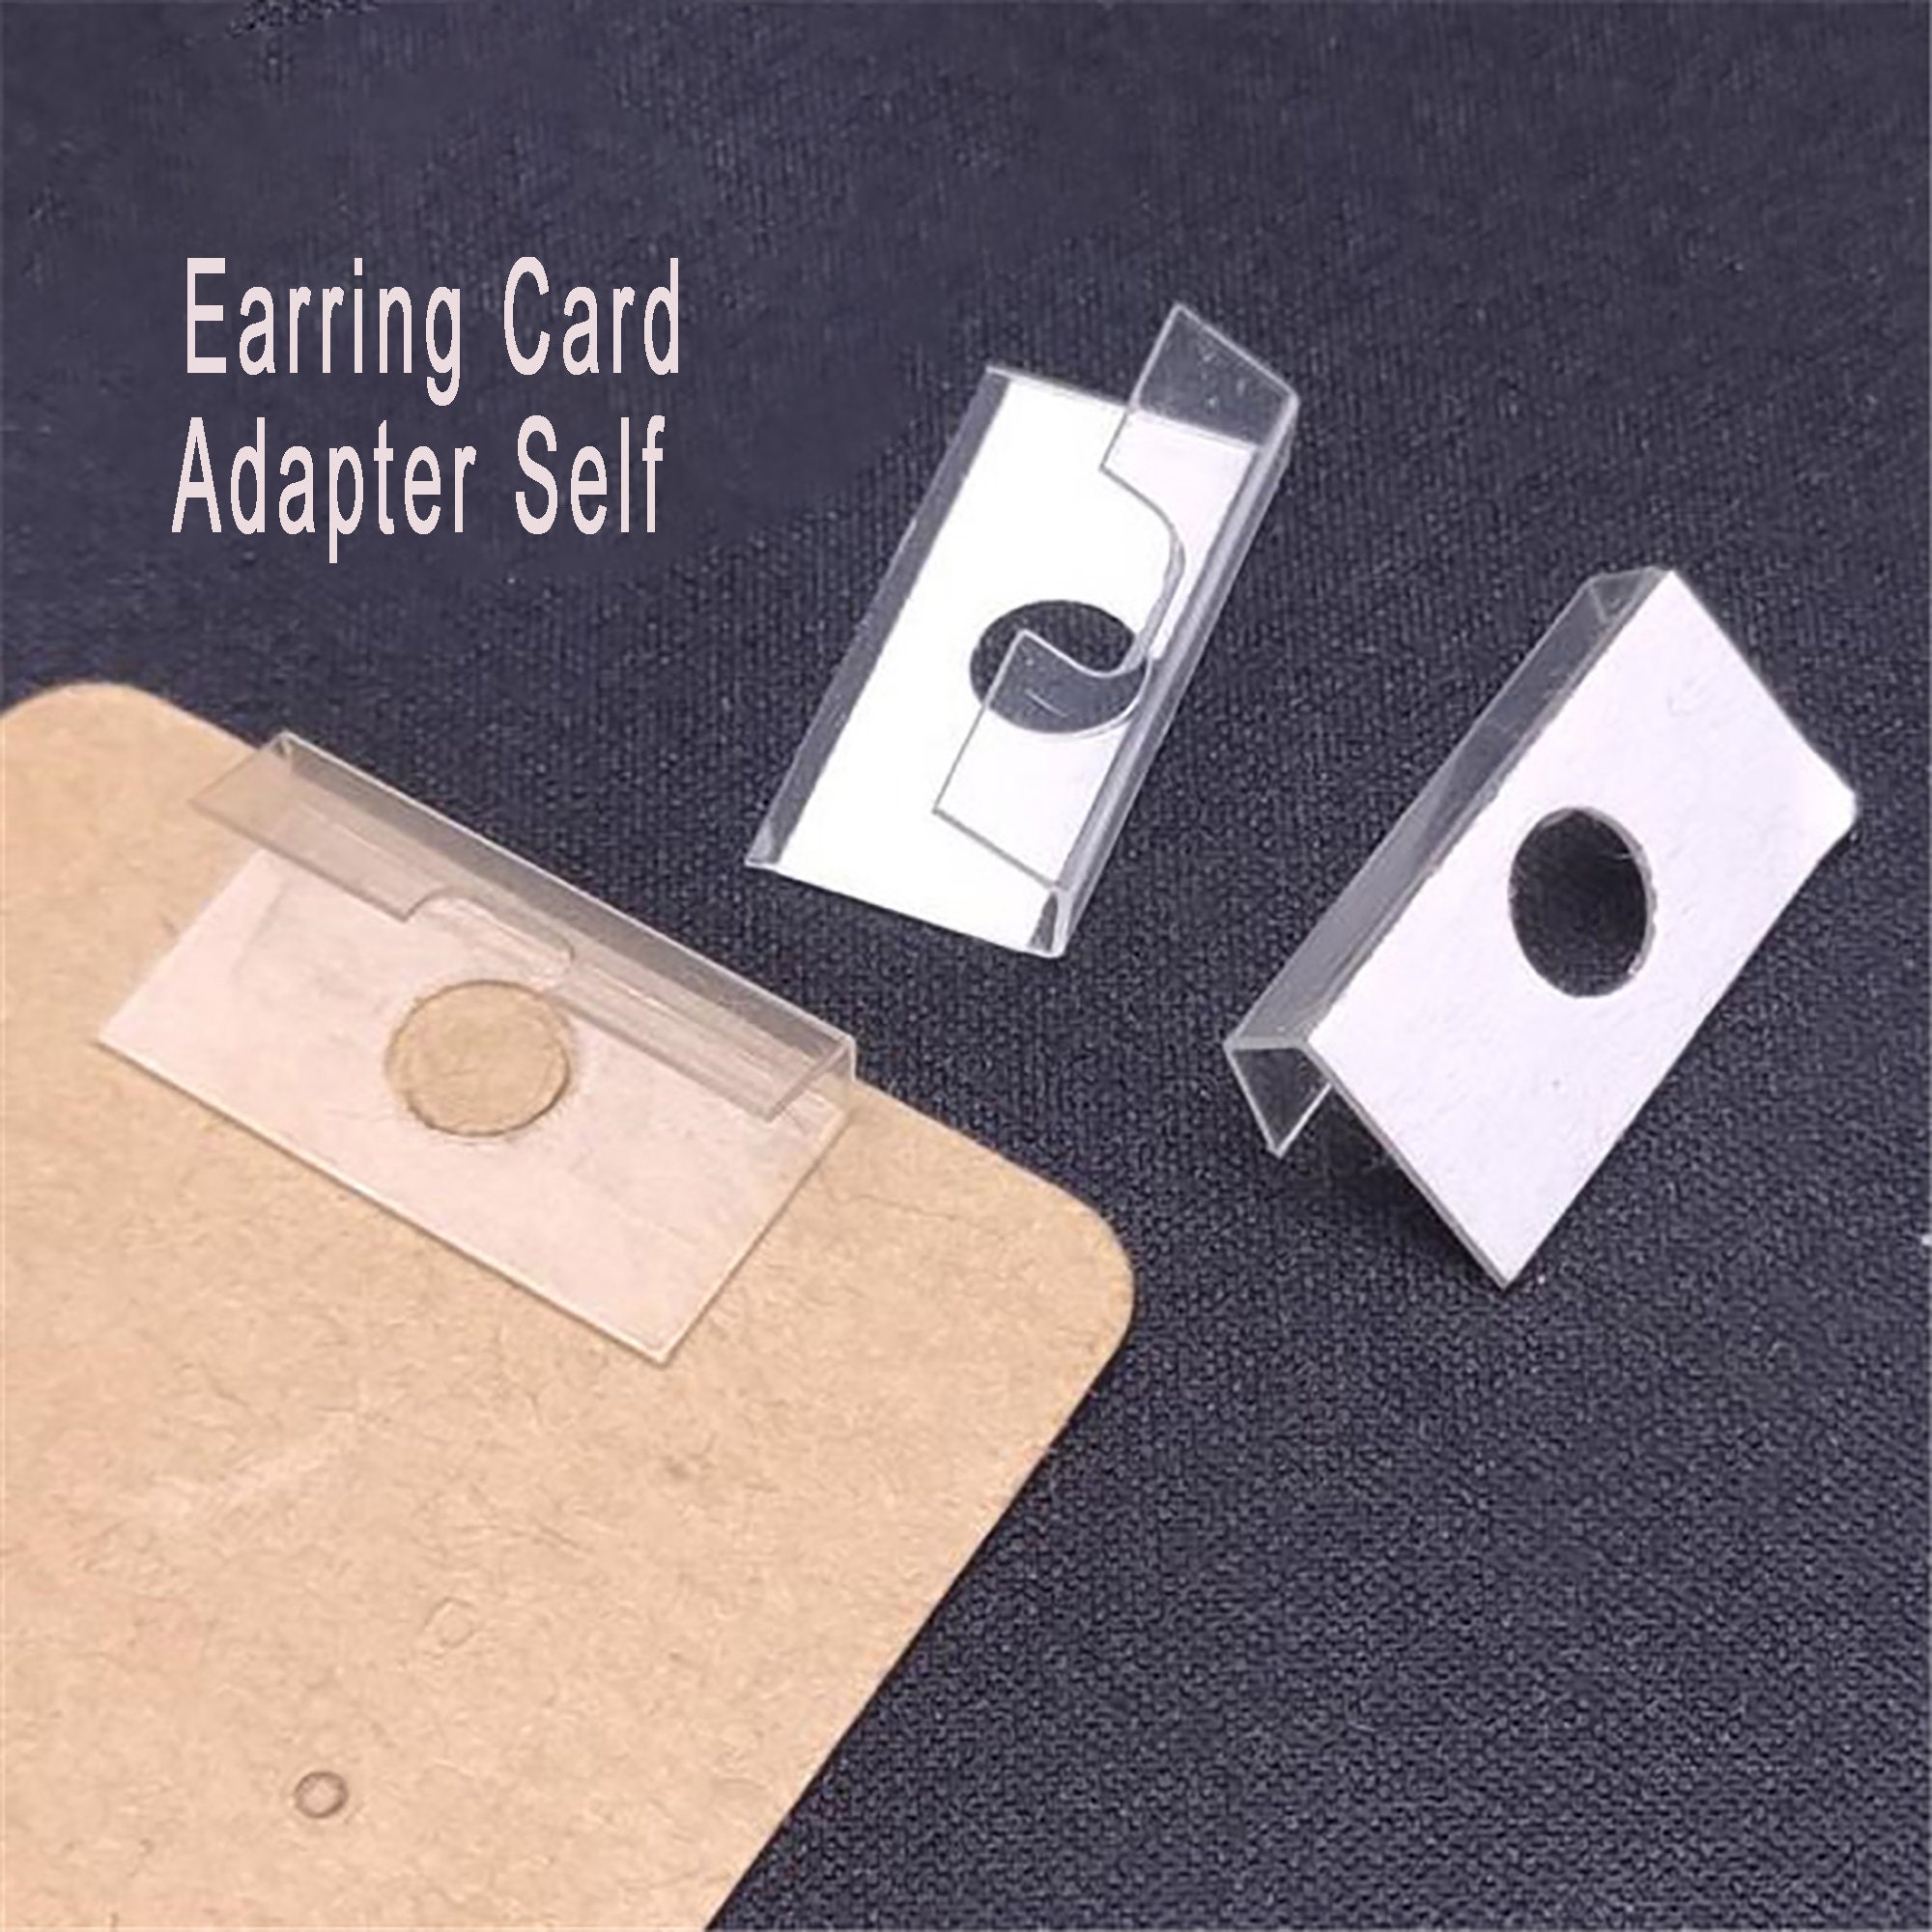 Milisten 200PCS Earring Card Adapter Self-Adhesive Lip Adapter Plastic Lip Hanger for Earring Necklace Card Display 